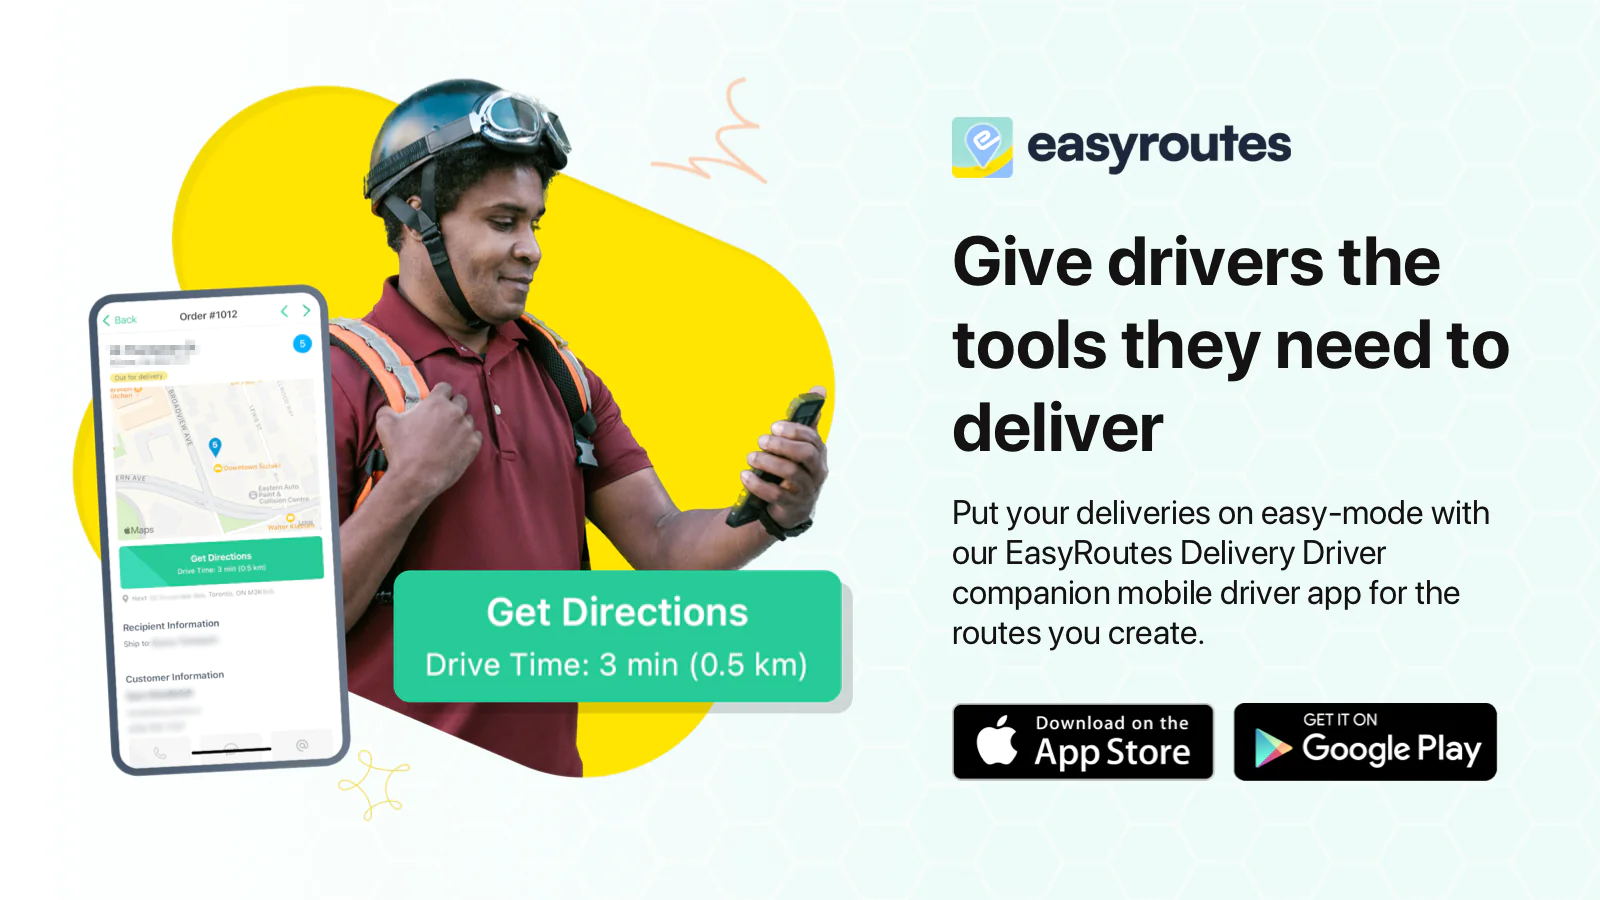 easyroutes-local-delivery-app-get-directions